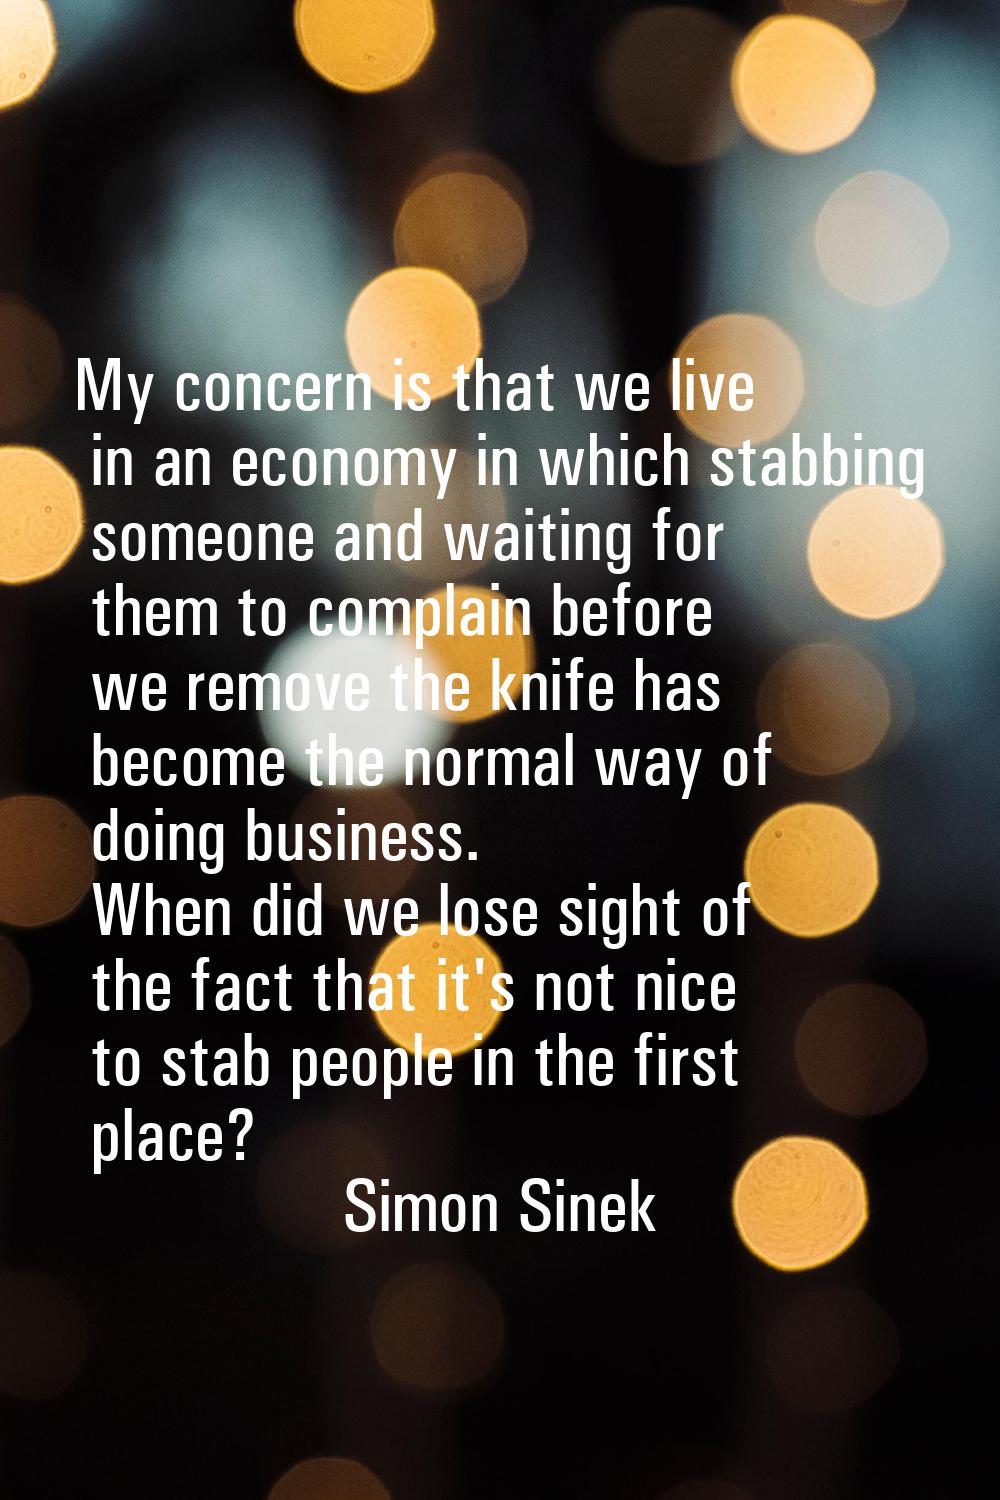 My concern is that we live in an economy in which stabbing someone and waiting for them to complain